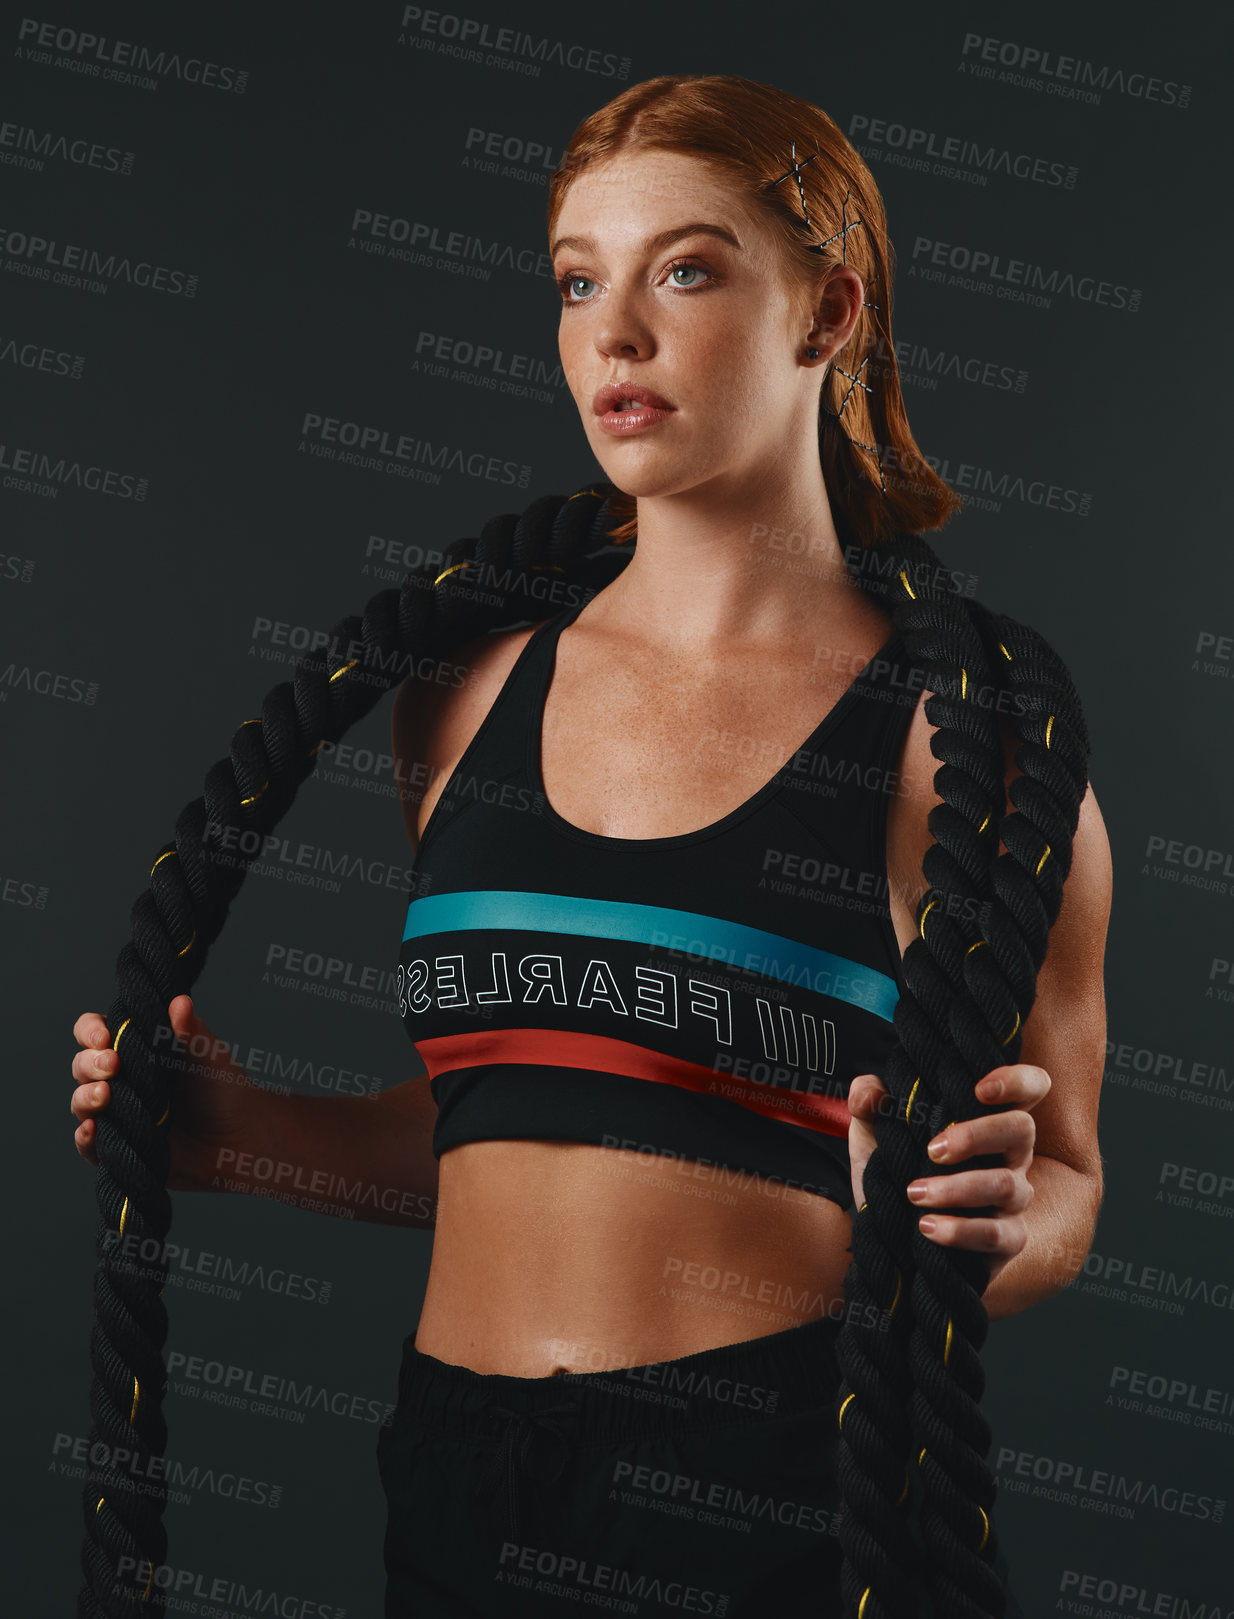 Buy stock photo Studio shot of a sporty young woman posing with a battle rope against a black background